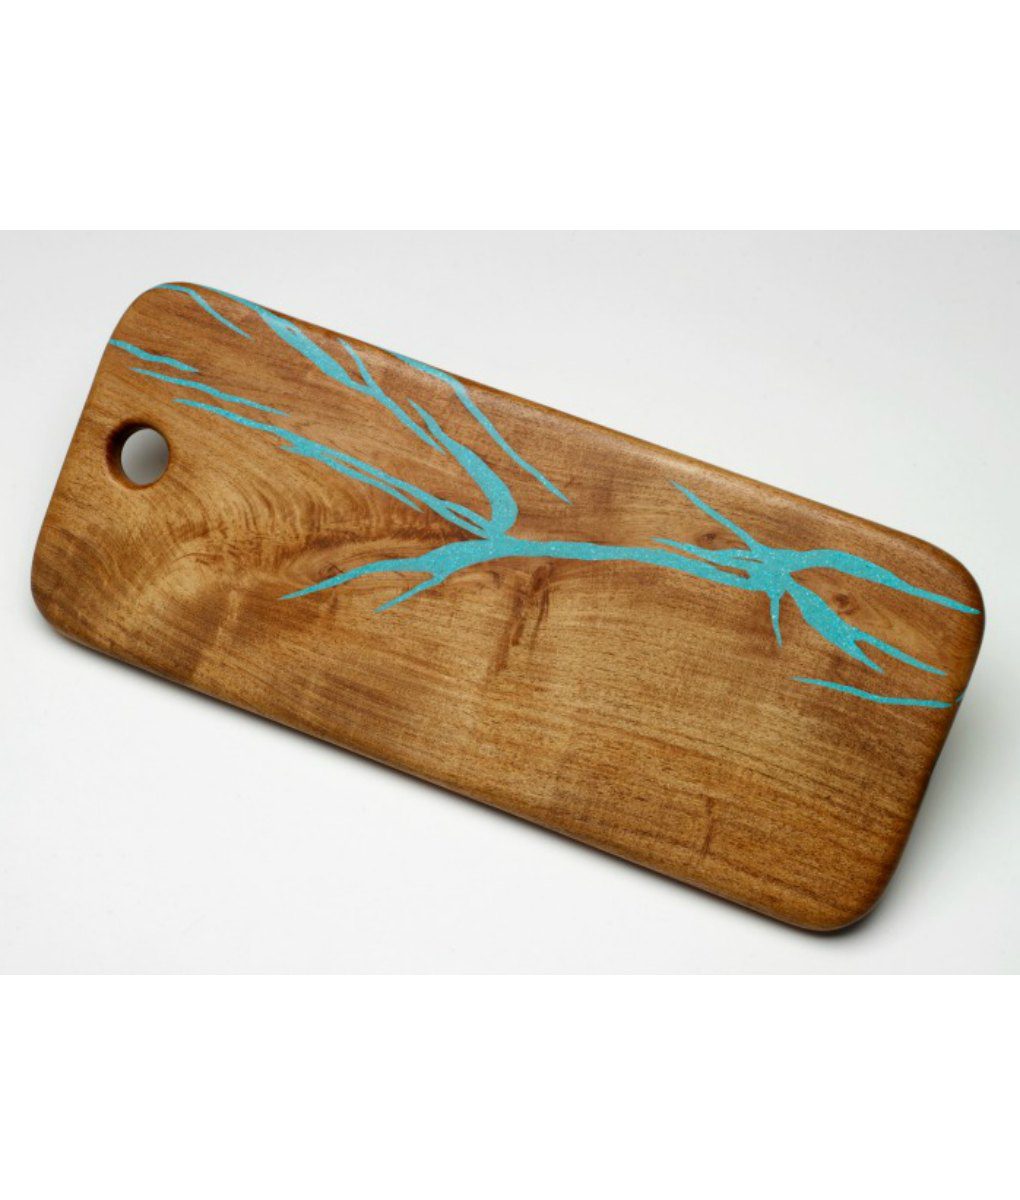 Walnut Live Edge Charcuterie Board with Turquoise Inlay